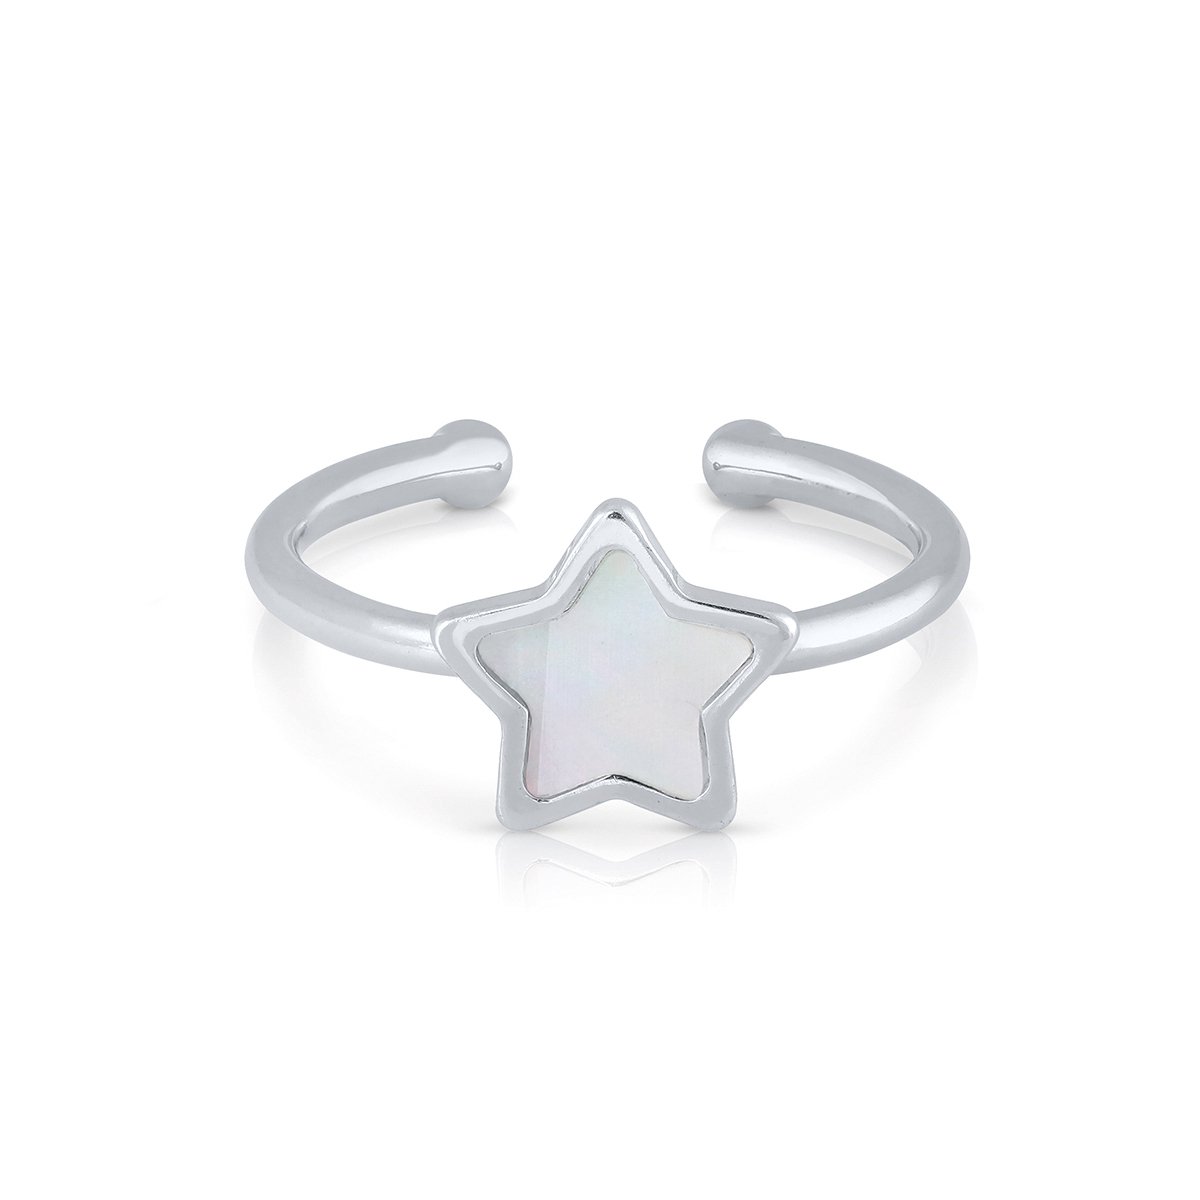 Lapetra LPPR0025 - Ring - Ster - 925 sterling zilver